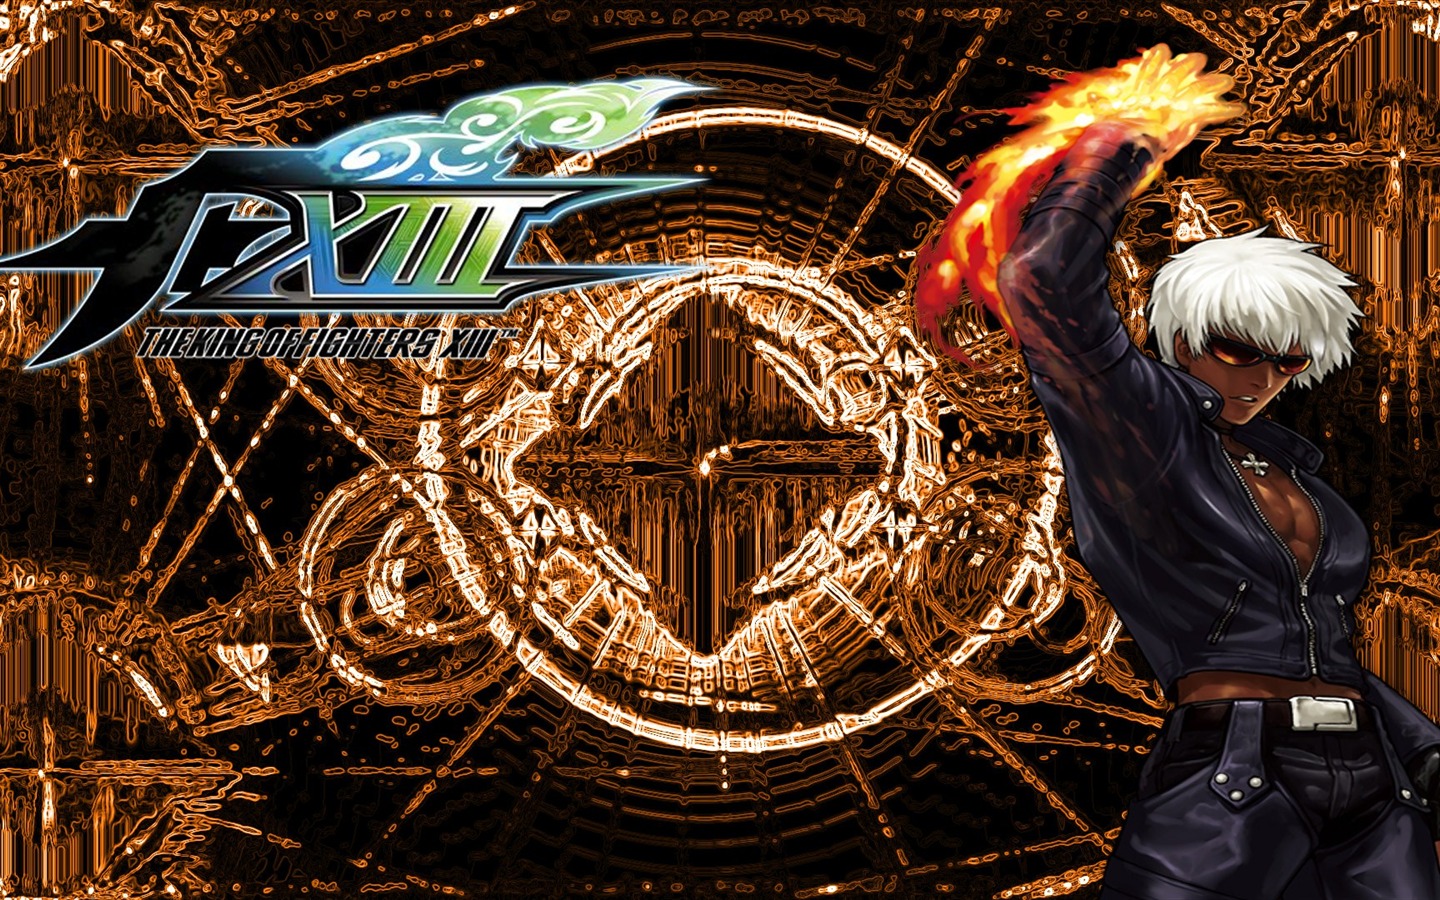 The King of Fighters XIII wallpapers #8 - 1440x900